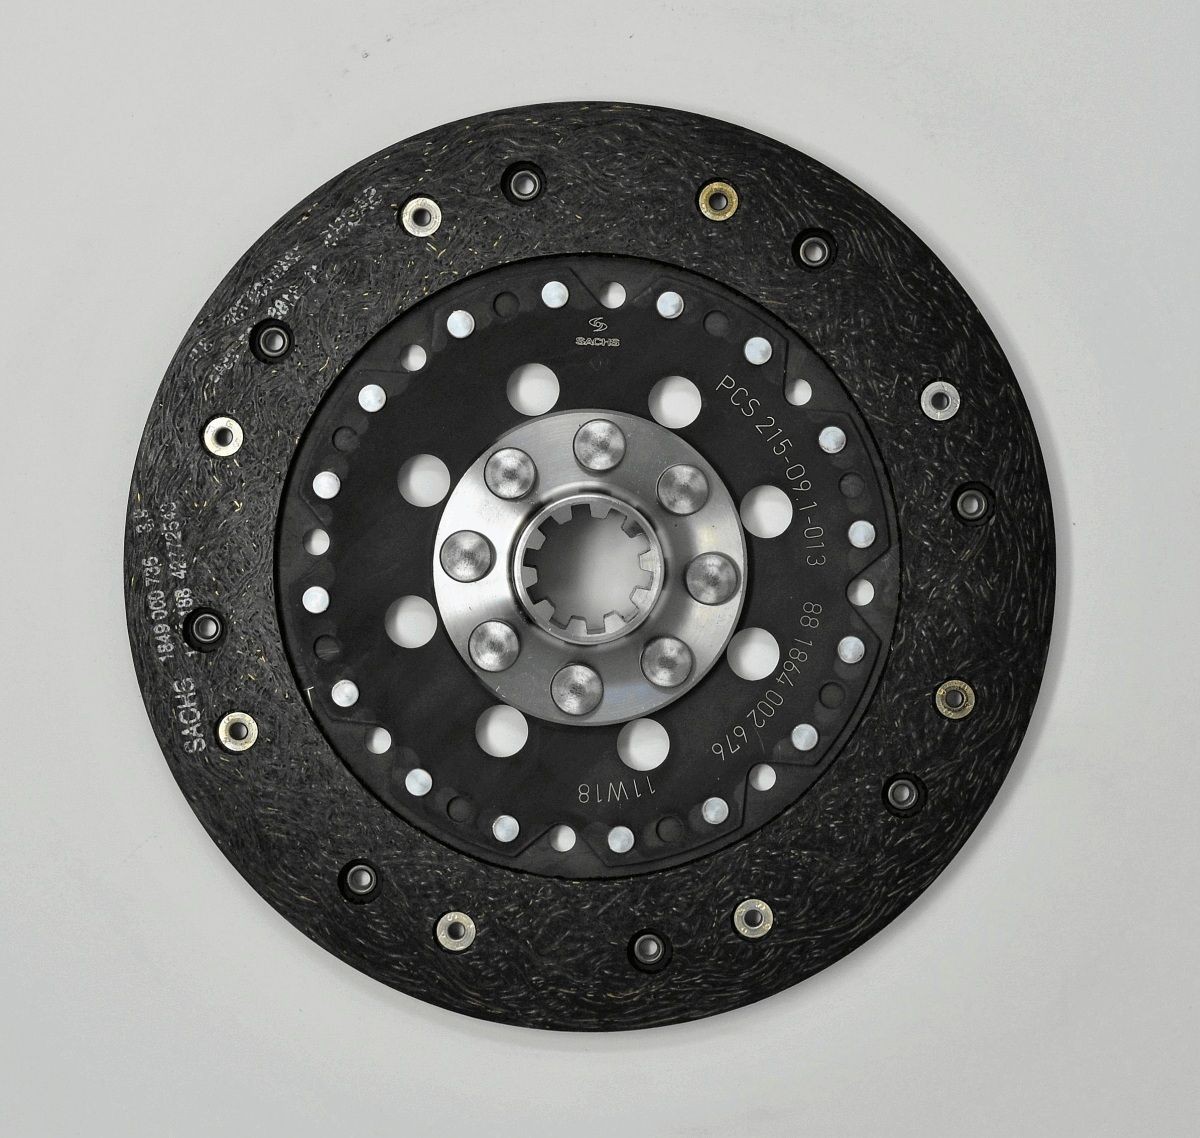 SACHS PERFORMANCE Performance 215mm, Number of Teeth: 10 Clutch Plate 881864 002676 buy